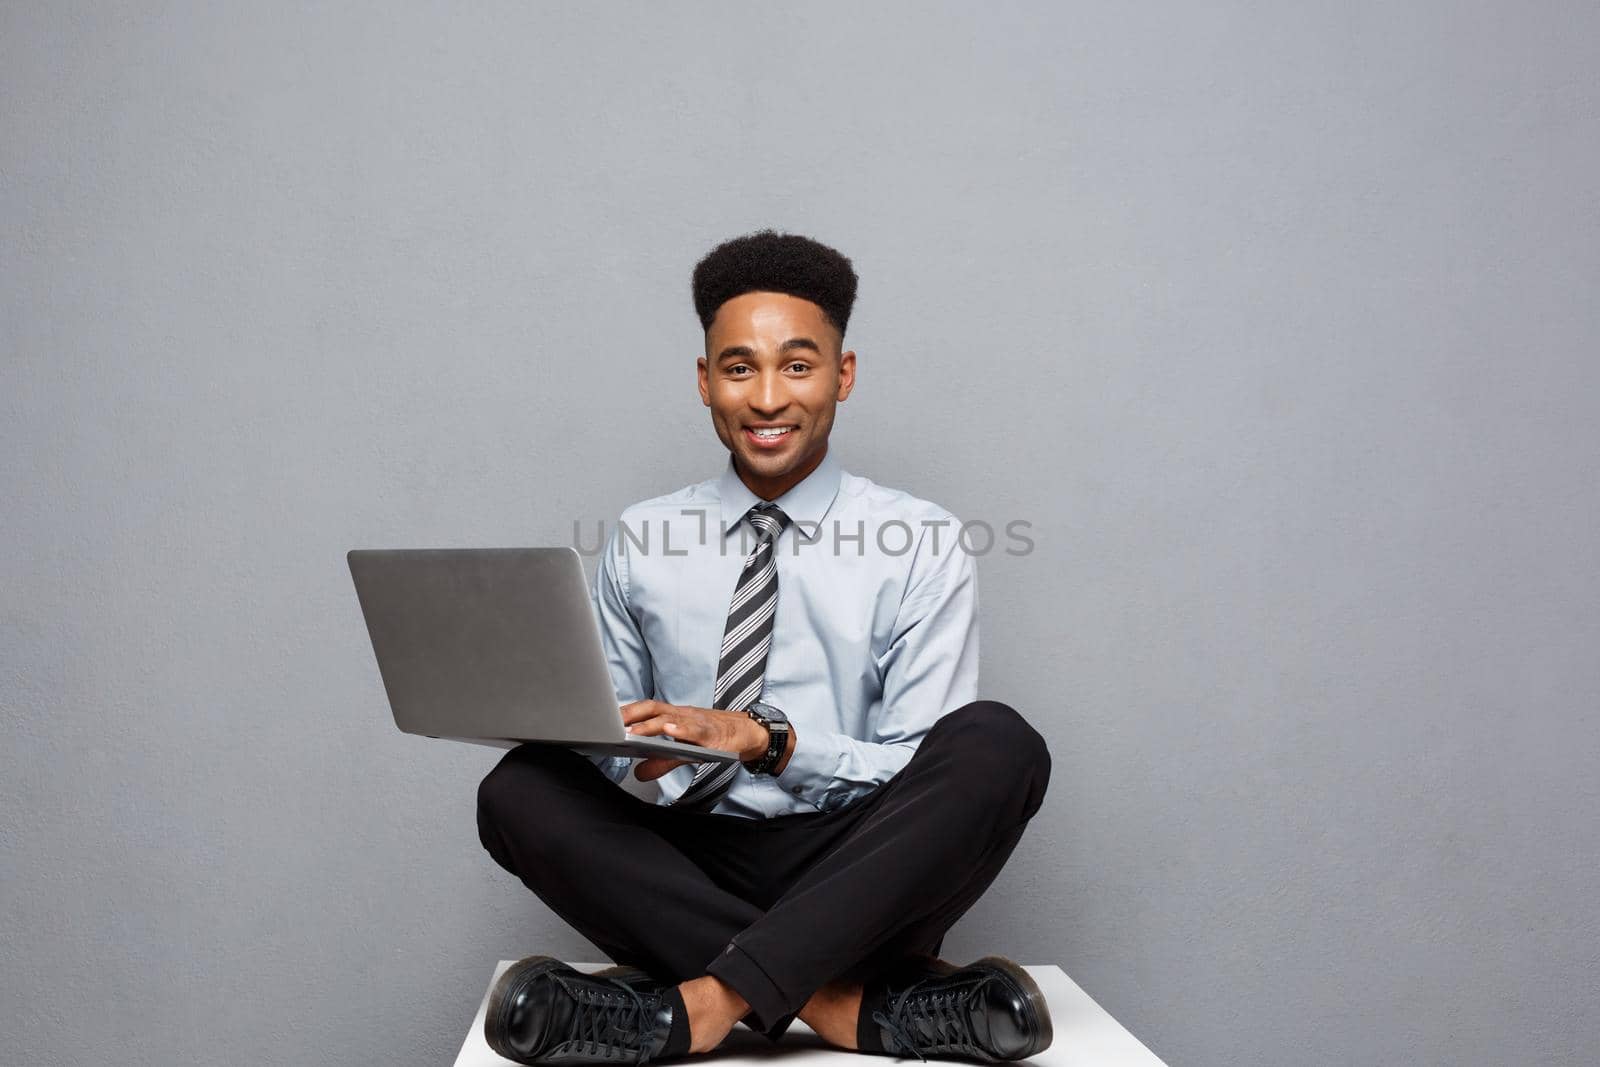 Business Concept - Happy handsome professional african american businessman enjoy playing on labtop